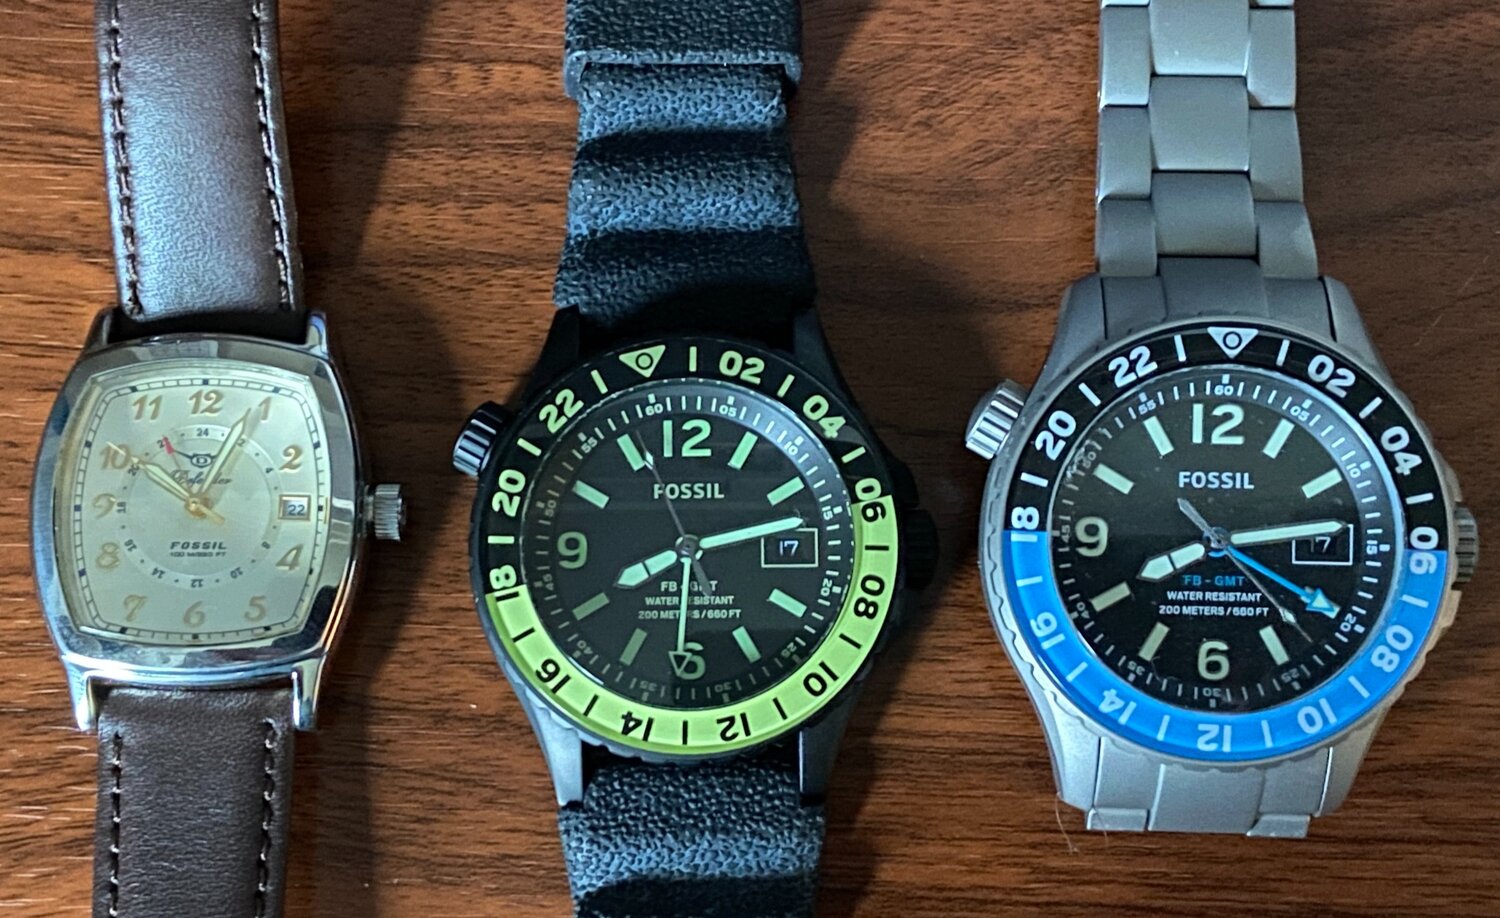 Fossil GMT Watches – they do exist! — Underground Fossil Collectors Club